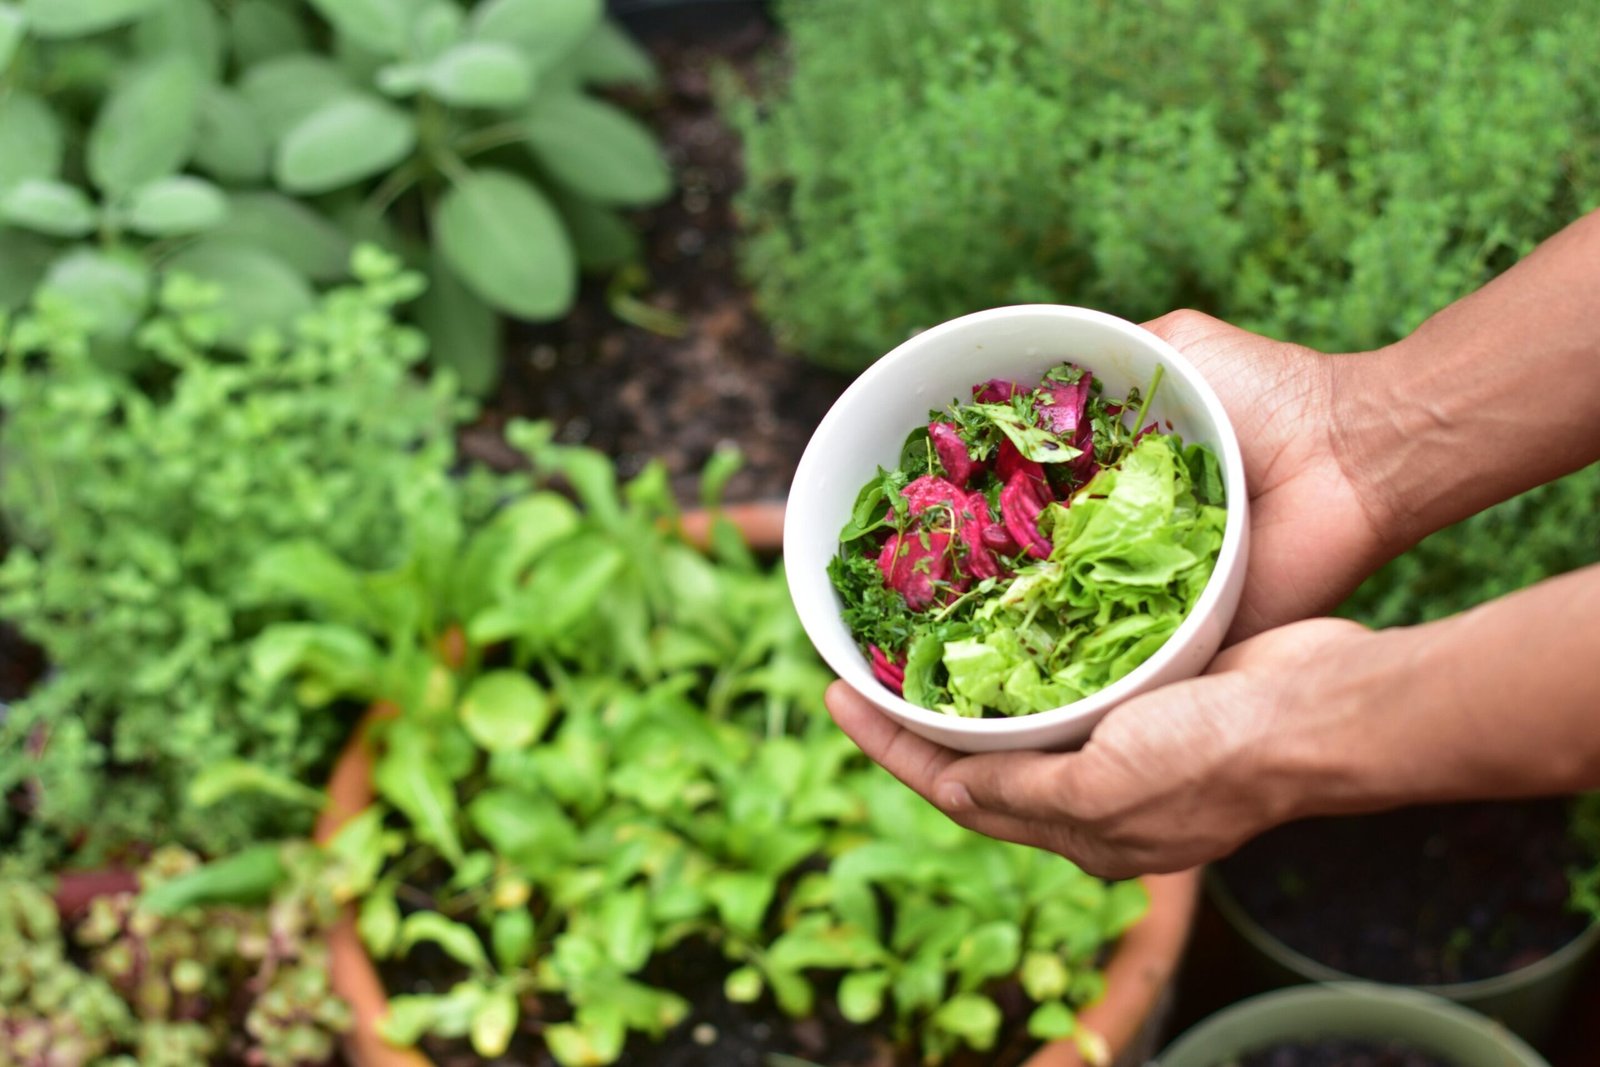 Vegetable gardening can improve health outcomes for cancer survivors, study finds